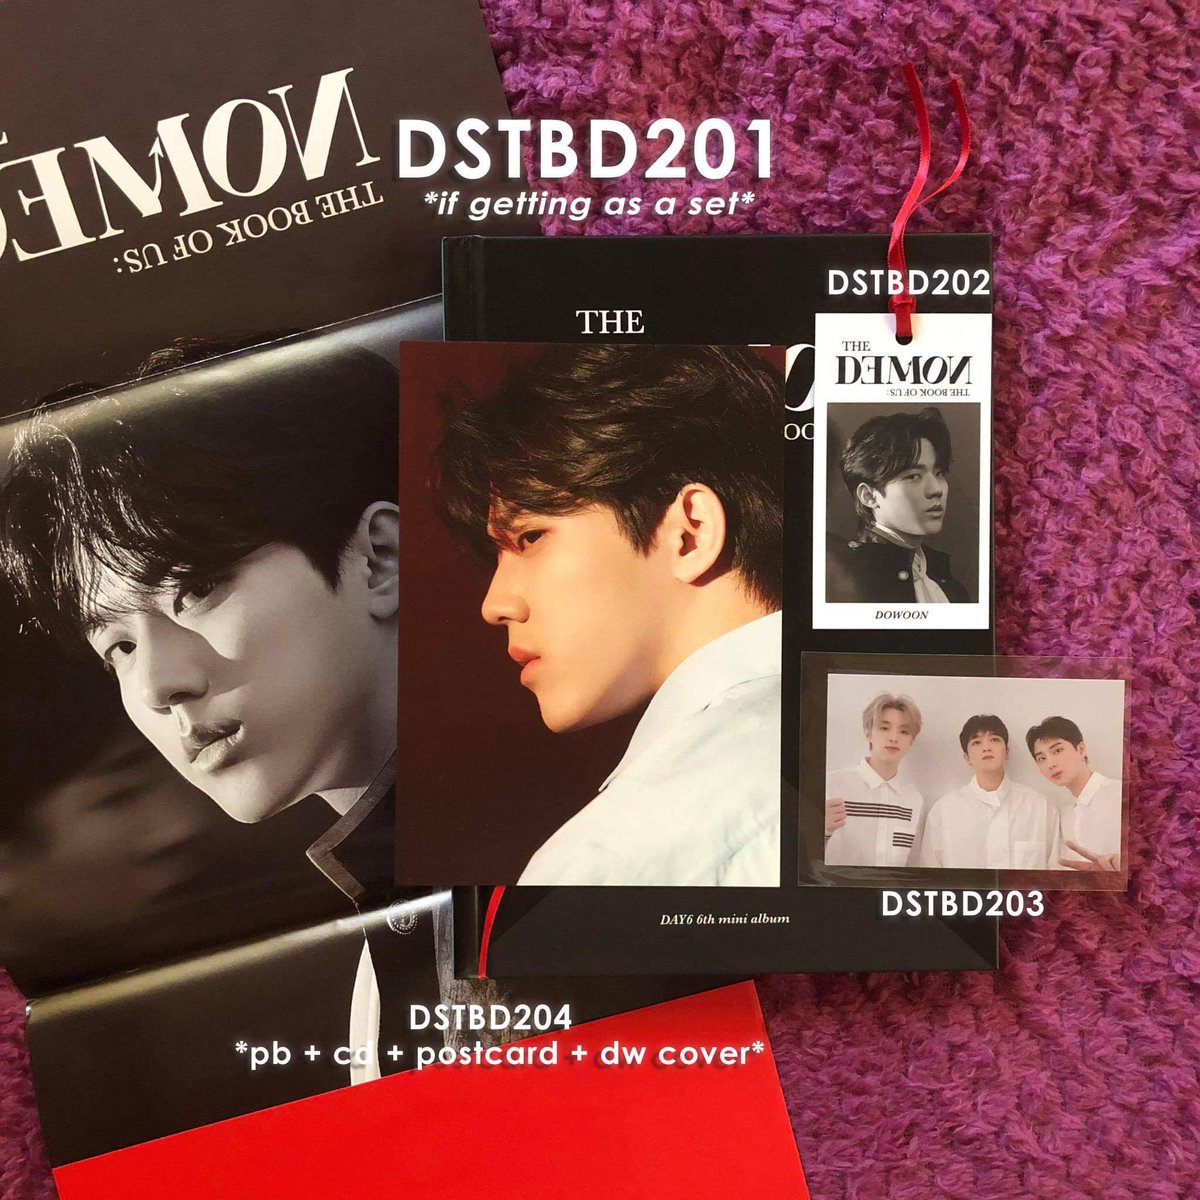 wts / lfbday6 albums (set / tingi)— tbou : demon (midday, midnight ver) lapag : april 12 - 6pm complete list, prices & photos : see tweet at the start of this thread ph sungjin jae youngk wonpil dowoon pc photocard unsealed bookmarks